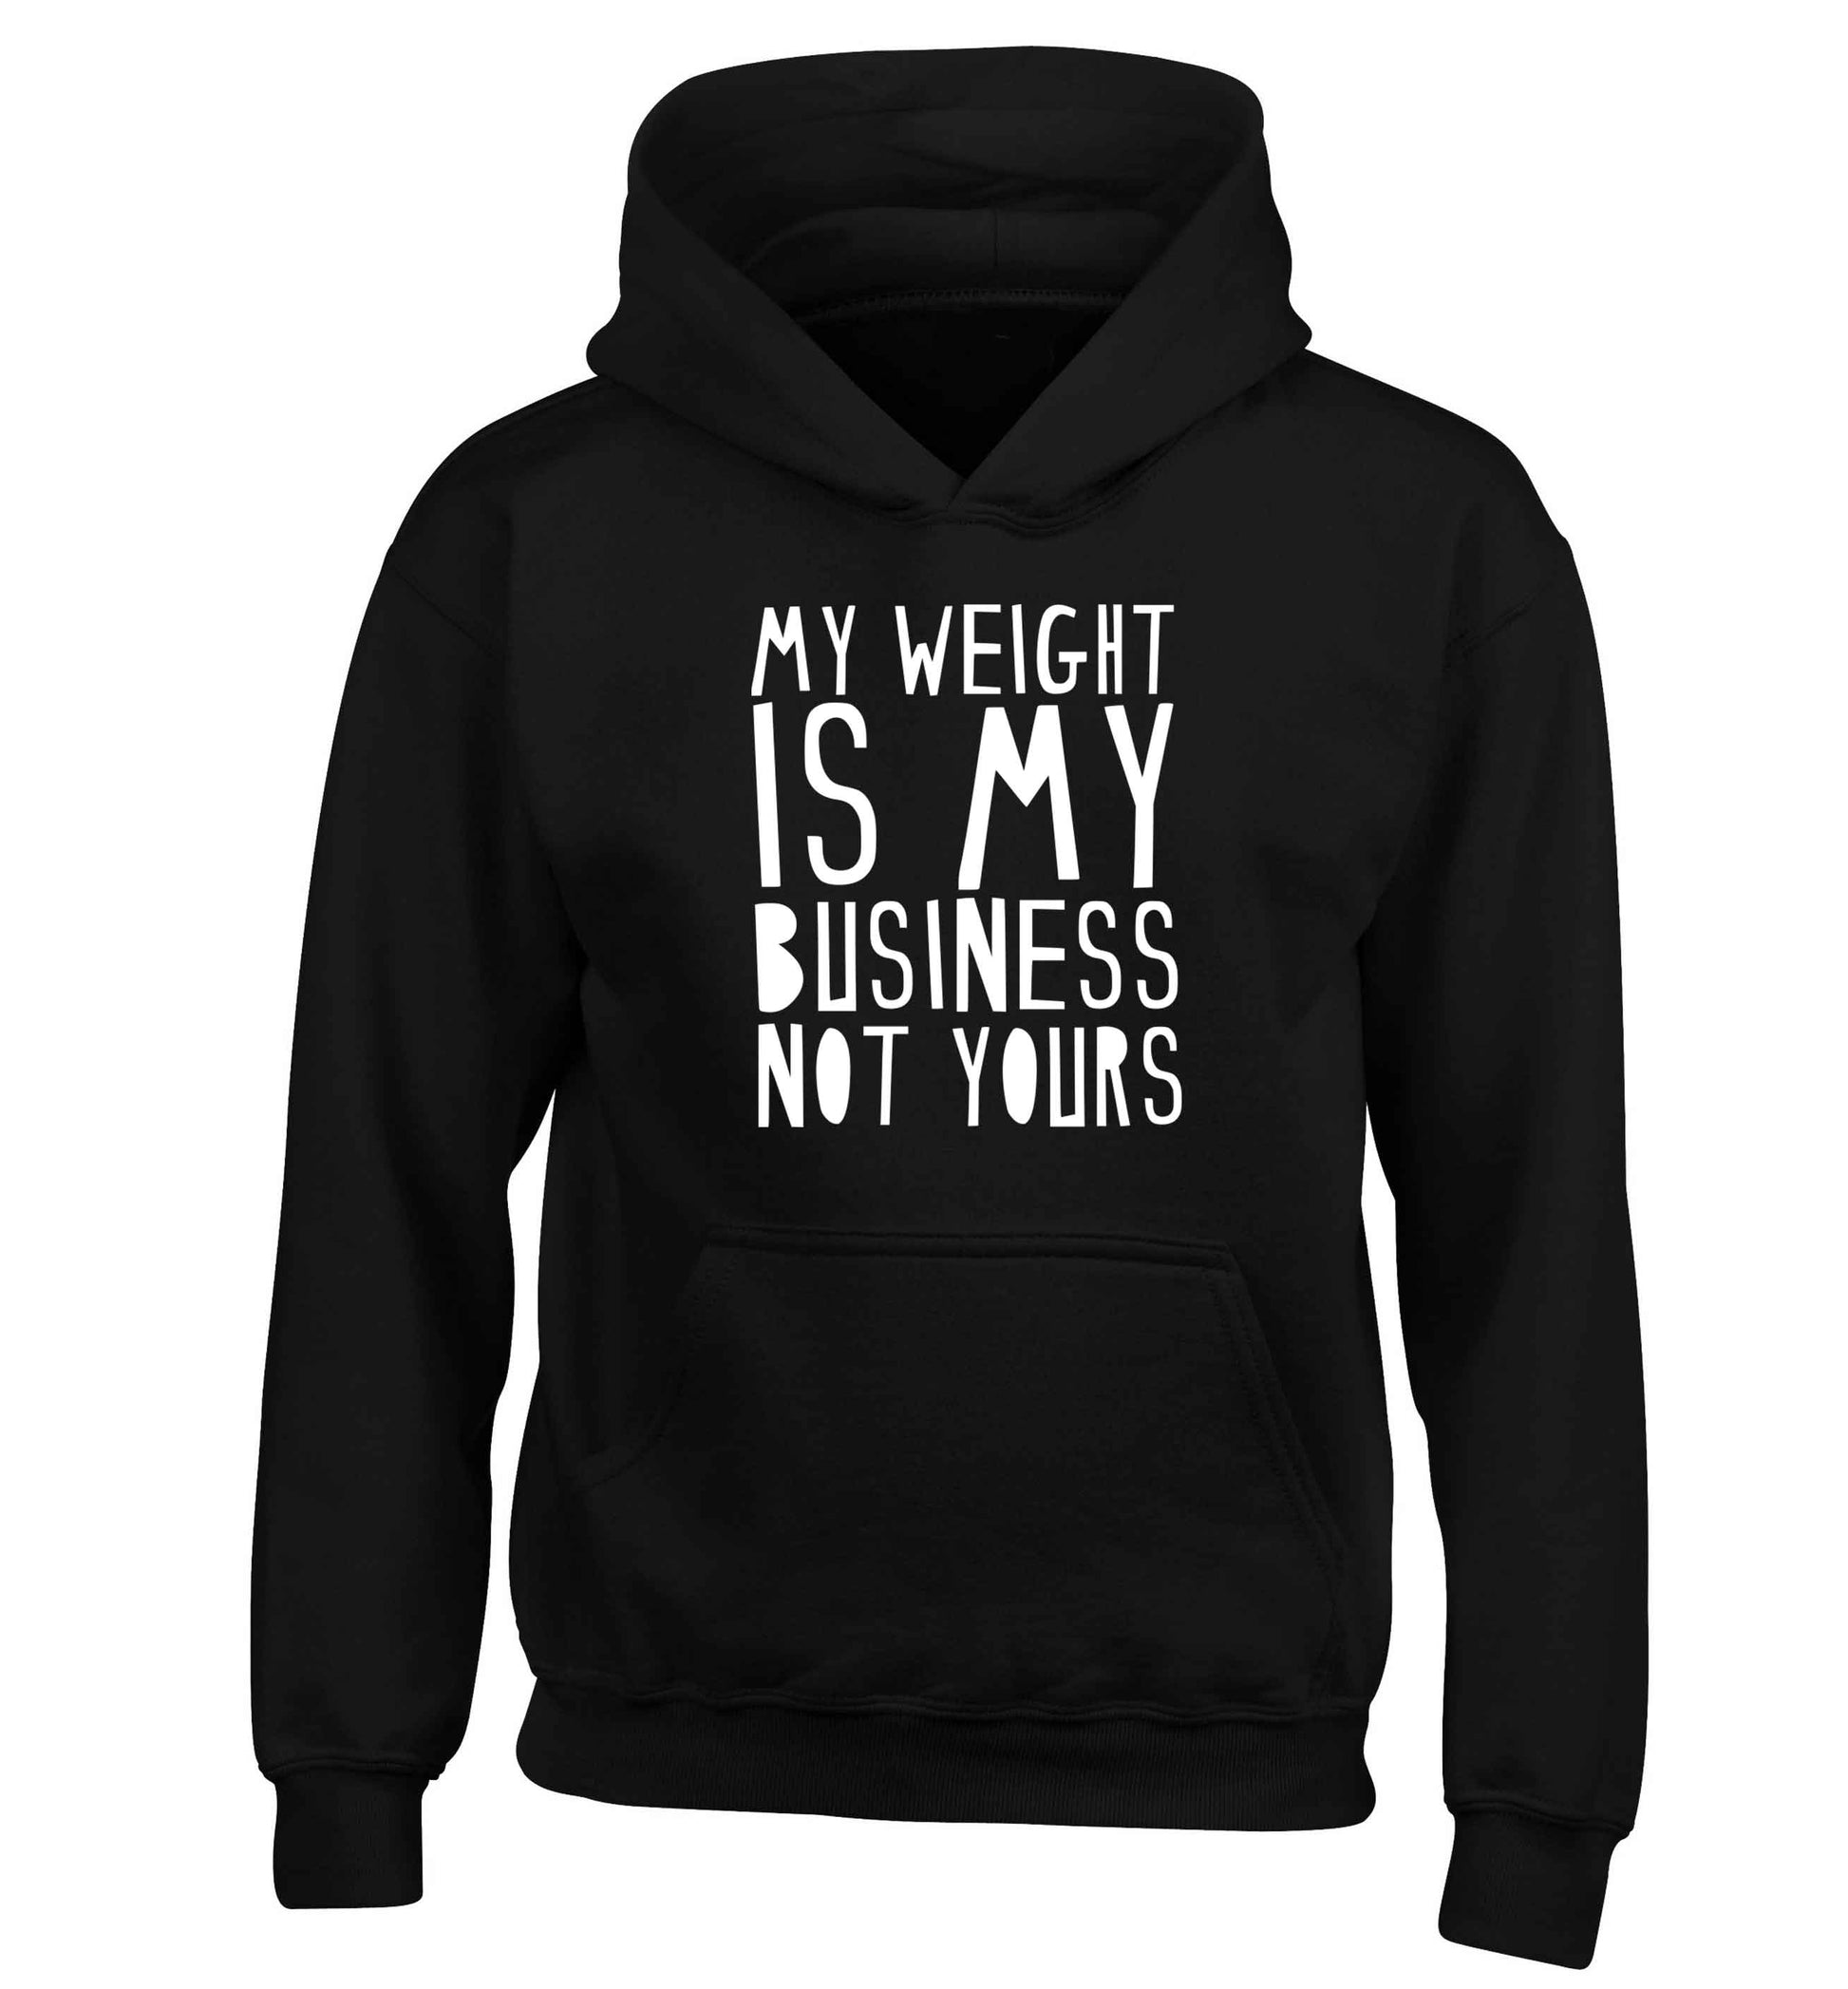 My weight is my business not yours children's black hoodie 12-13 Years